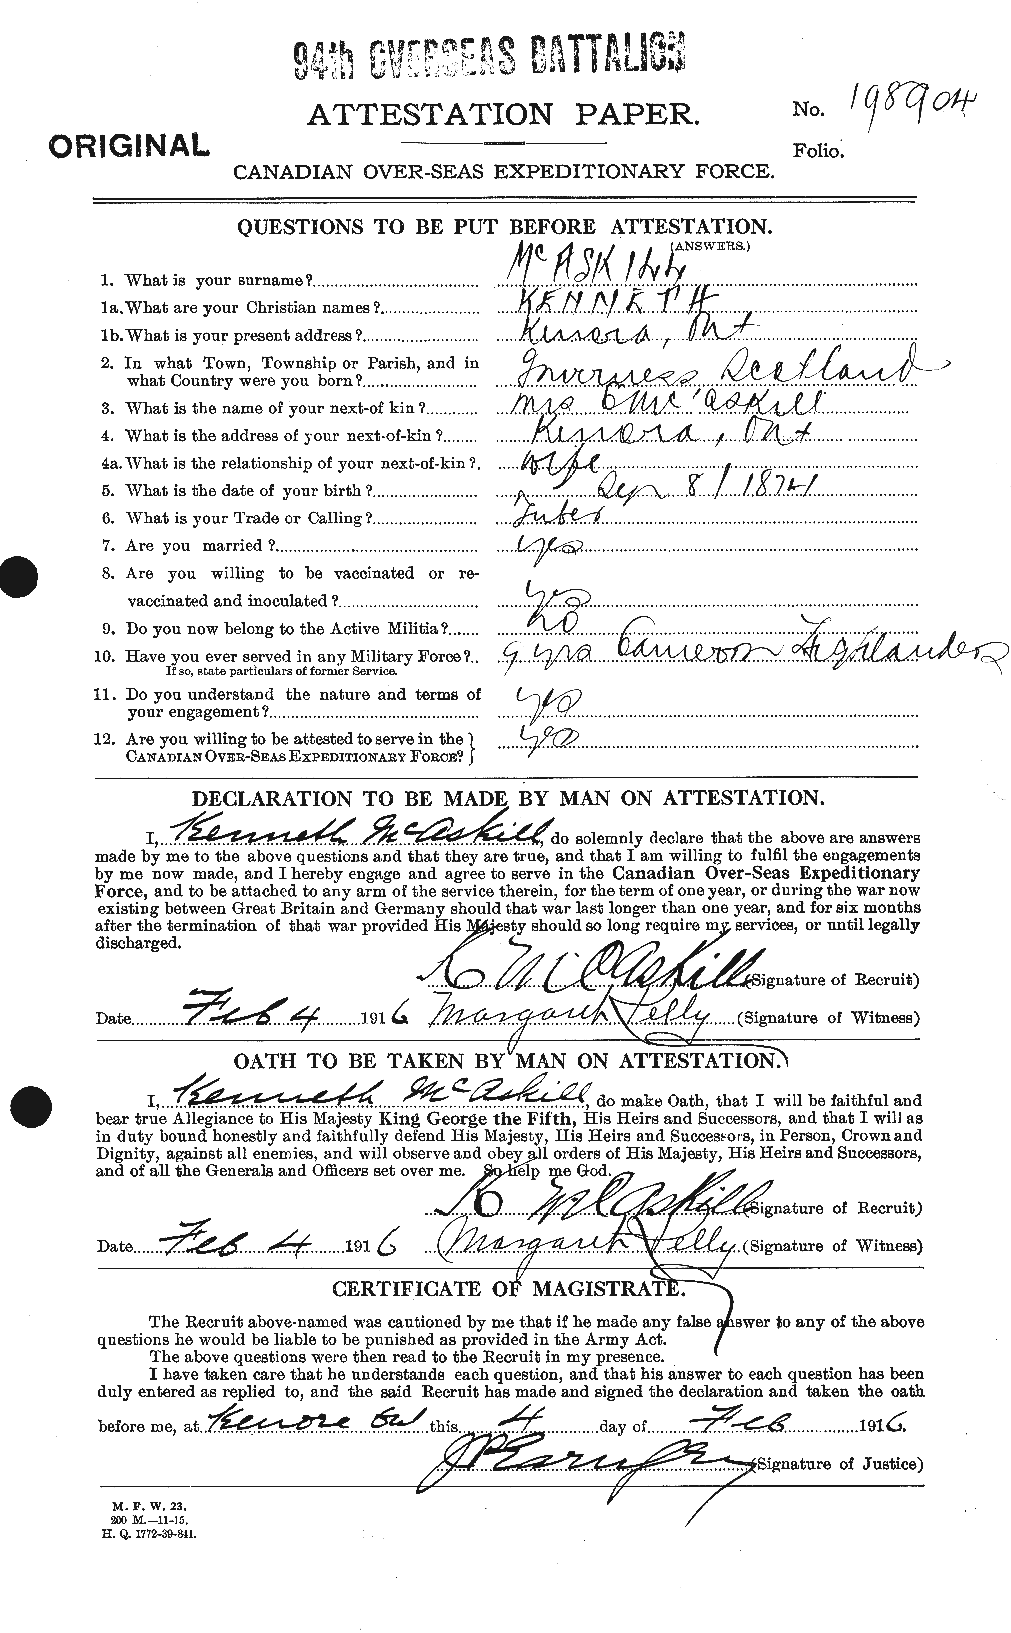 Personnel Records of the First World War - CEF 130551a